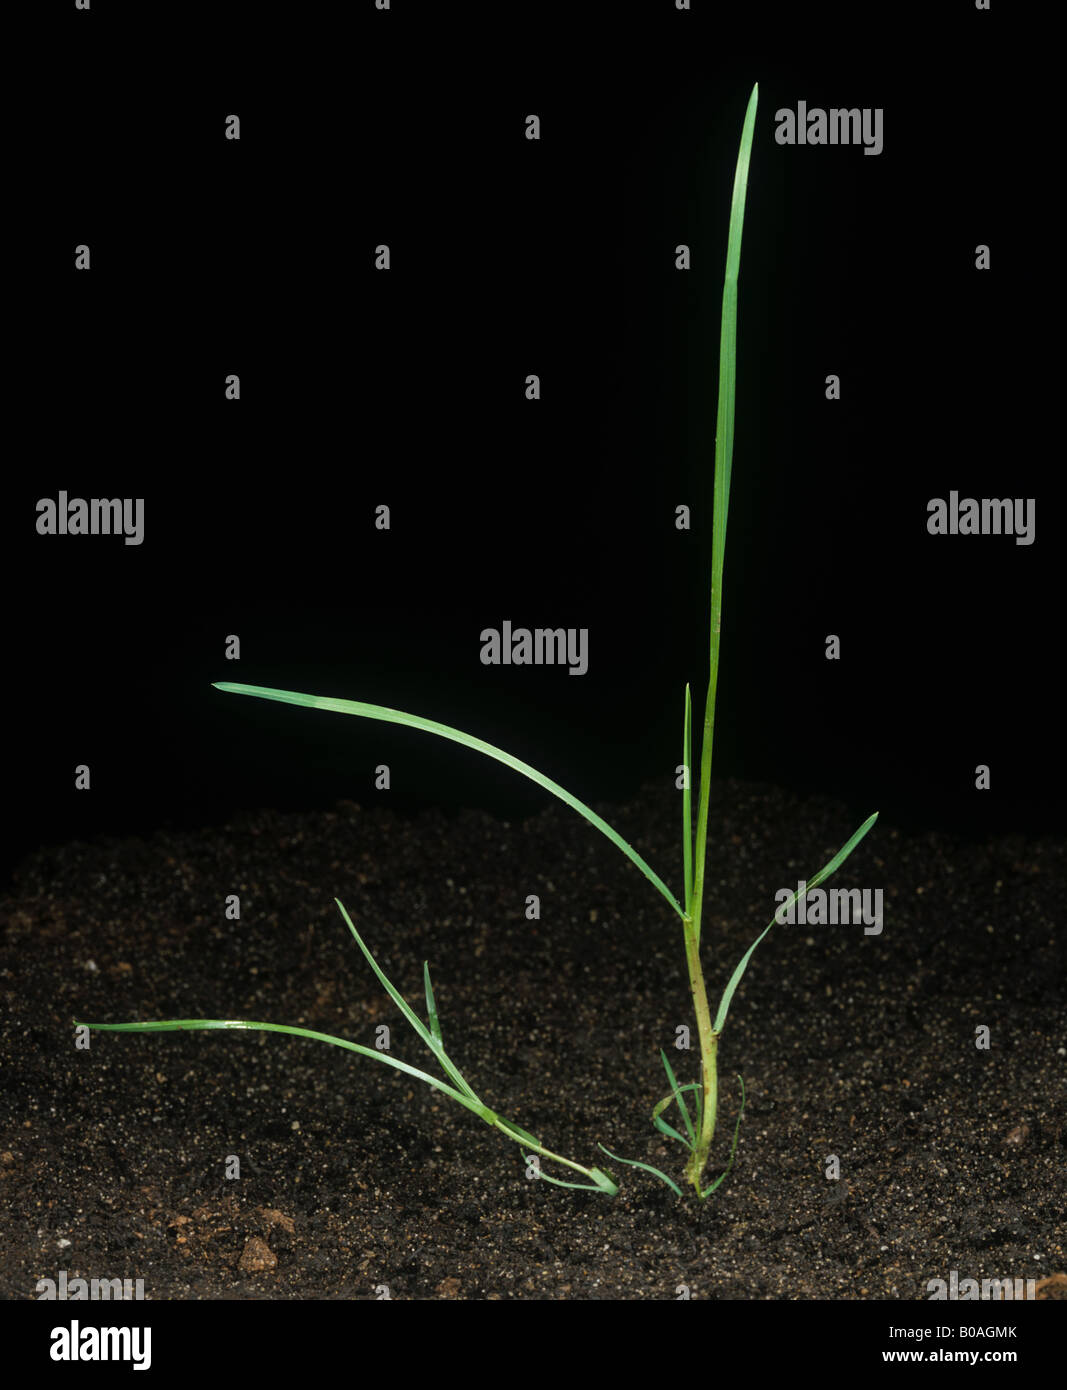 Young blackgrass Alopecurus myosuroides single arable annual grass weed with a single tiller Stock Photo